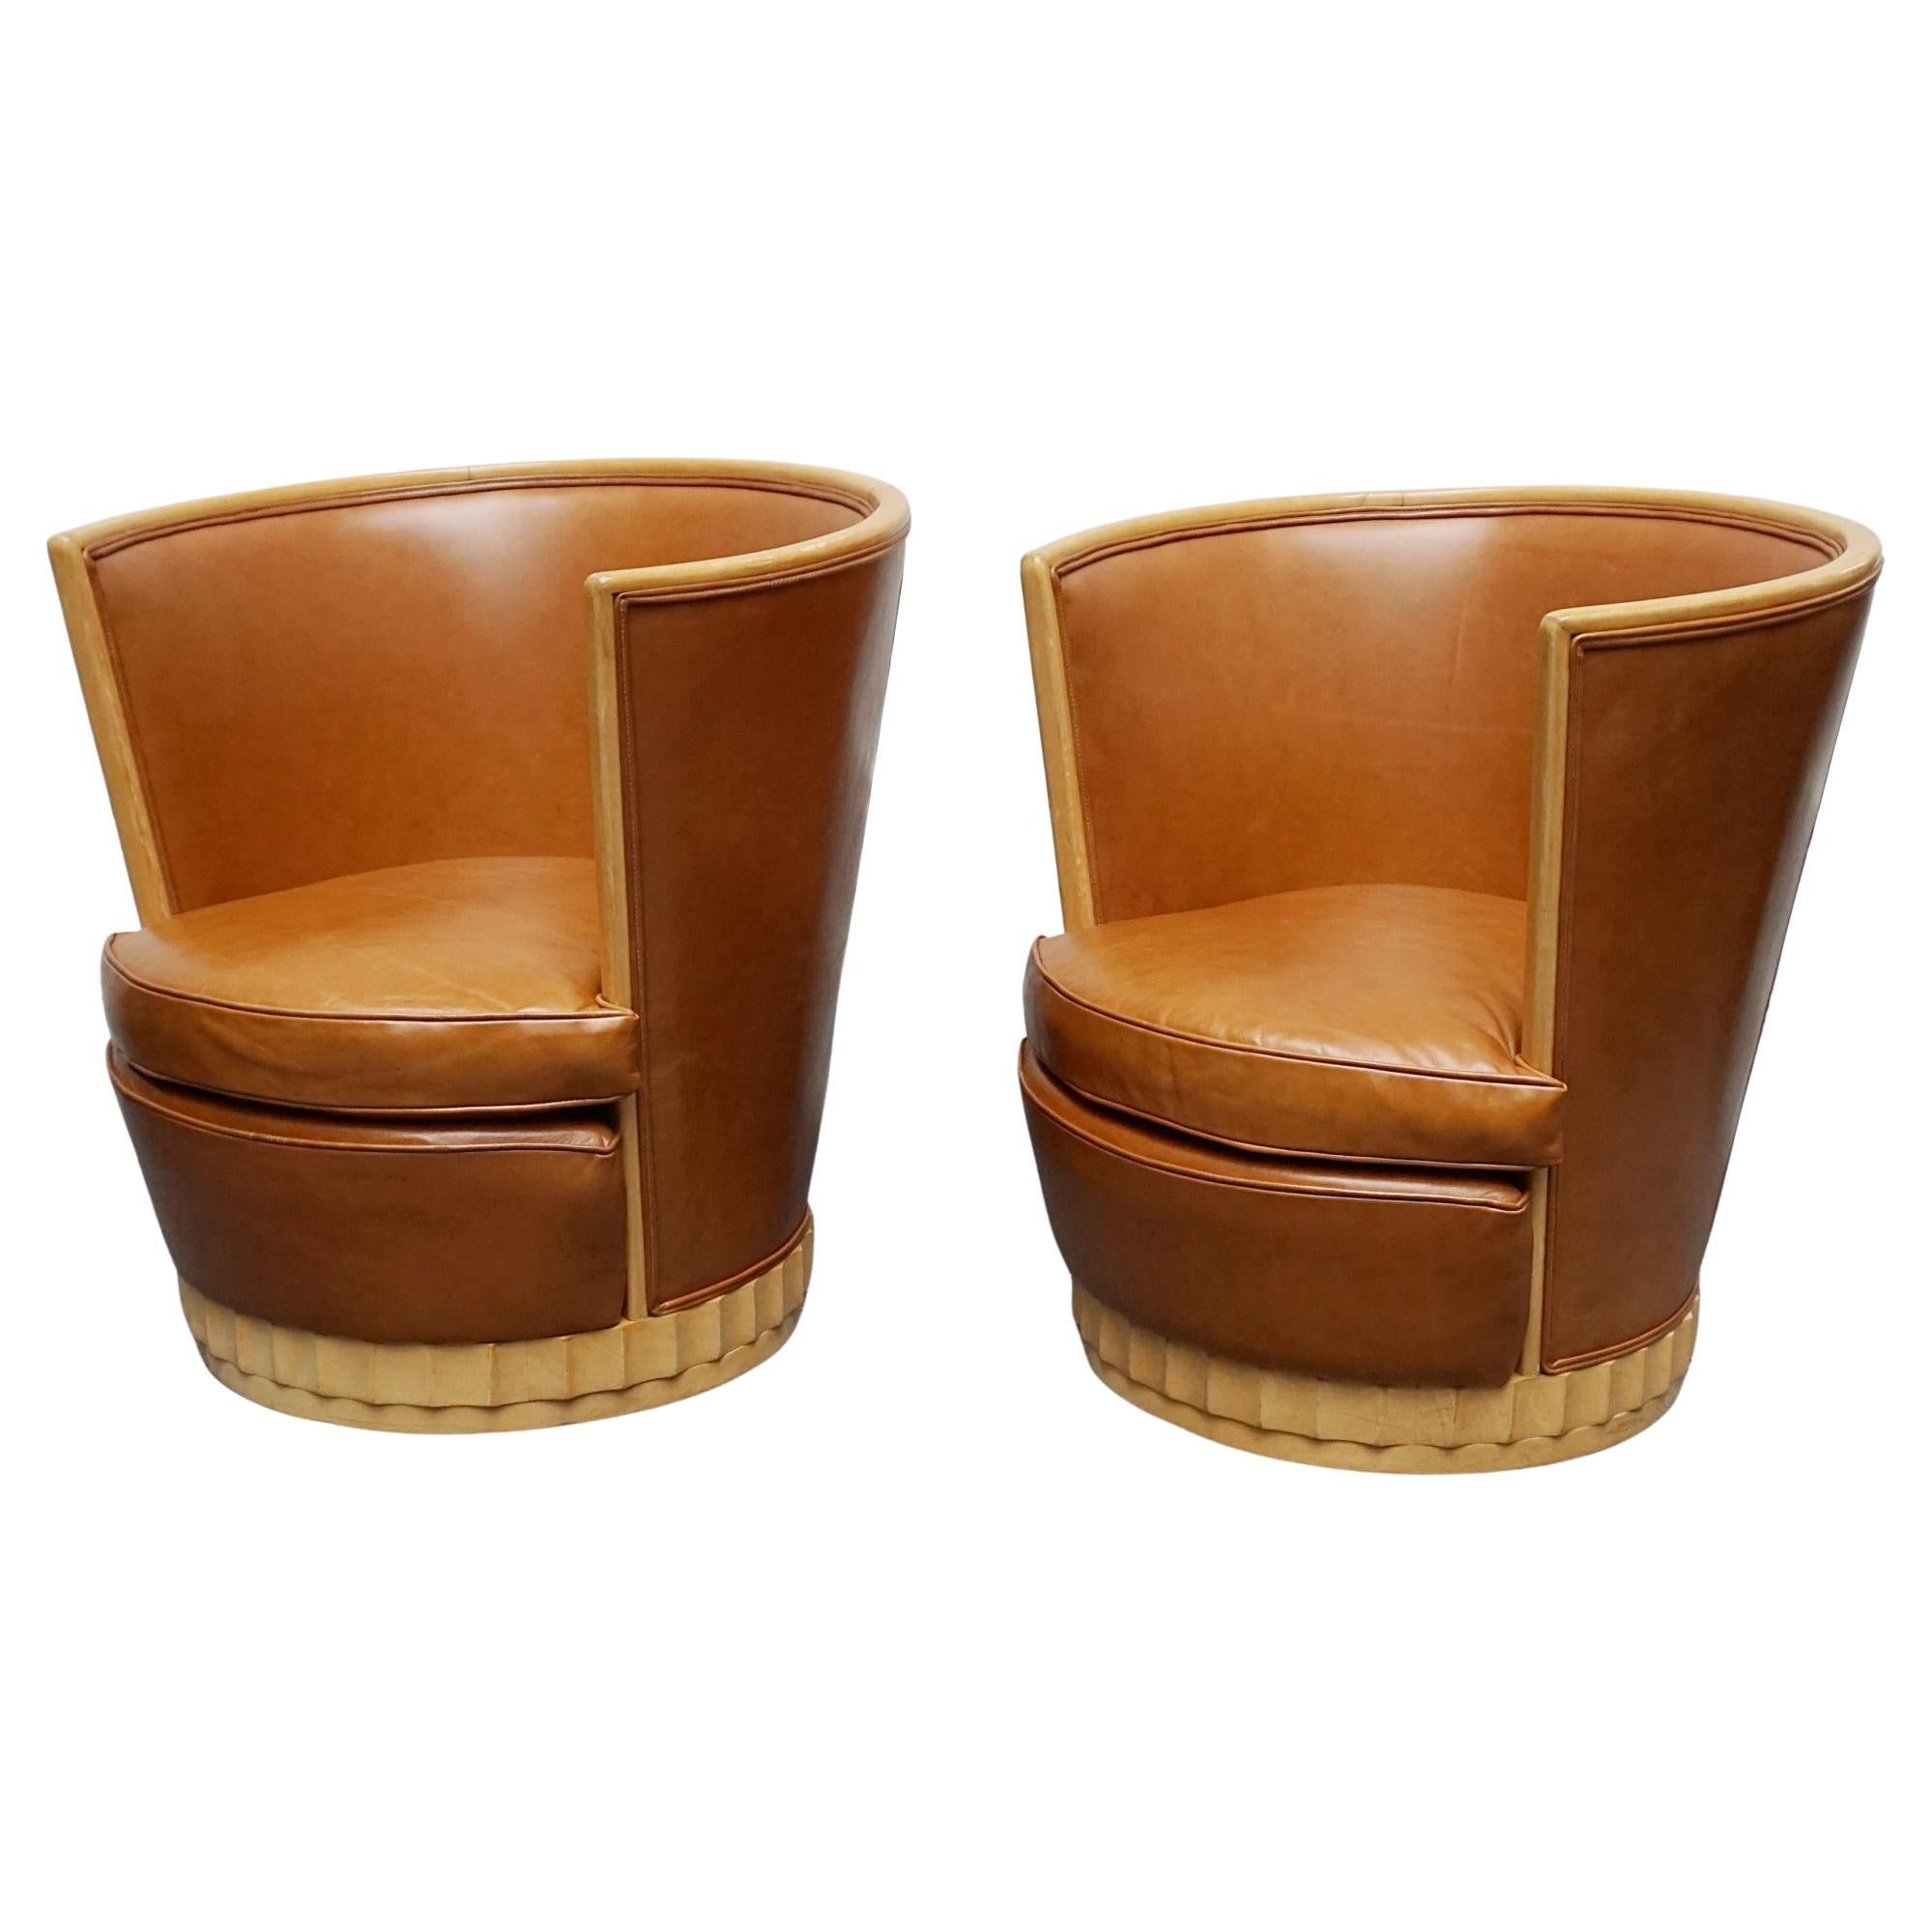 A Pair of Satin Birch and Brown Leather Upholstered Art Deco Tub Chairs